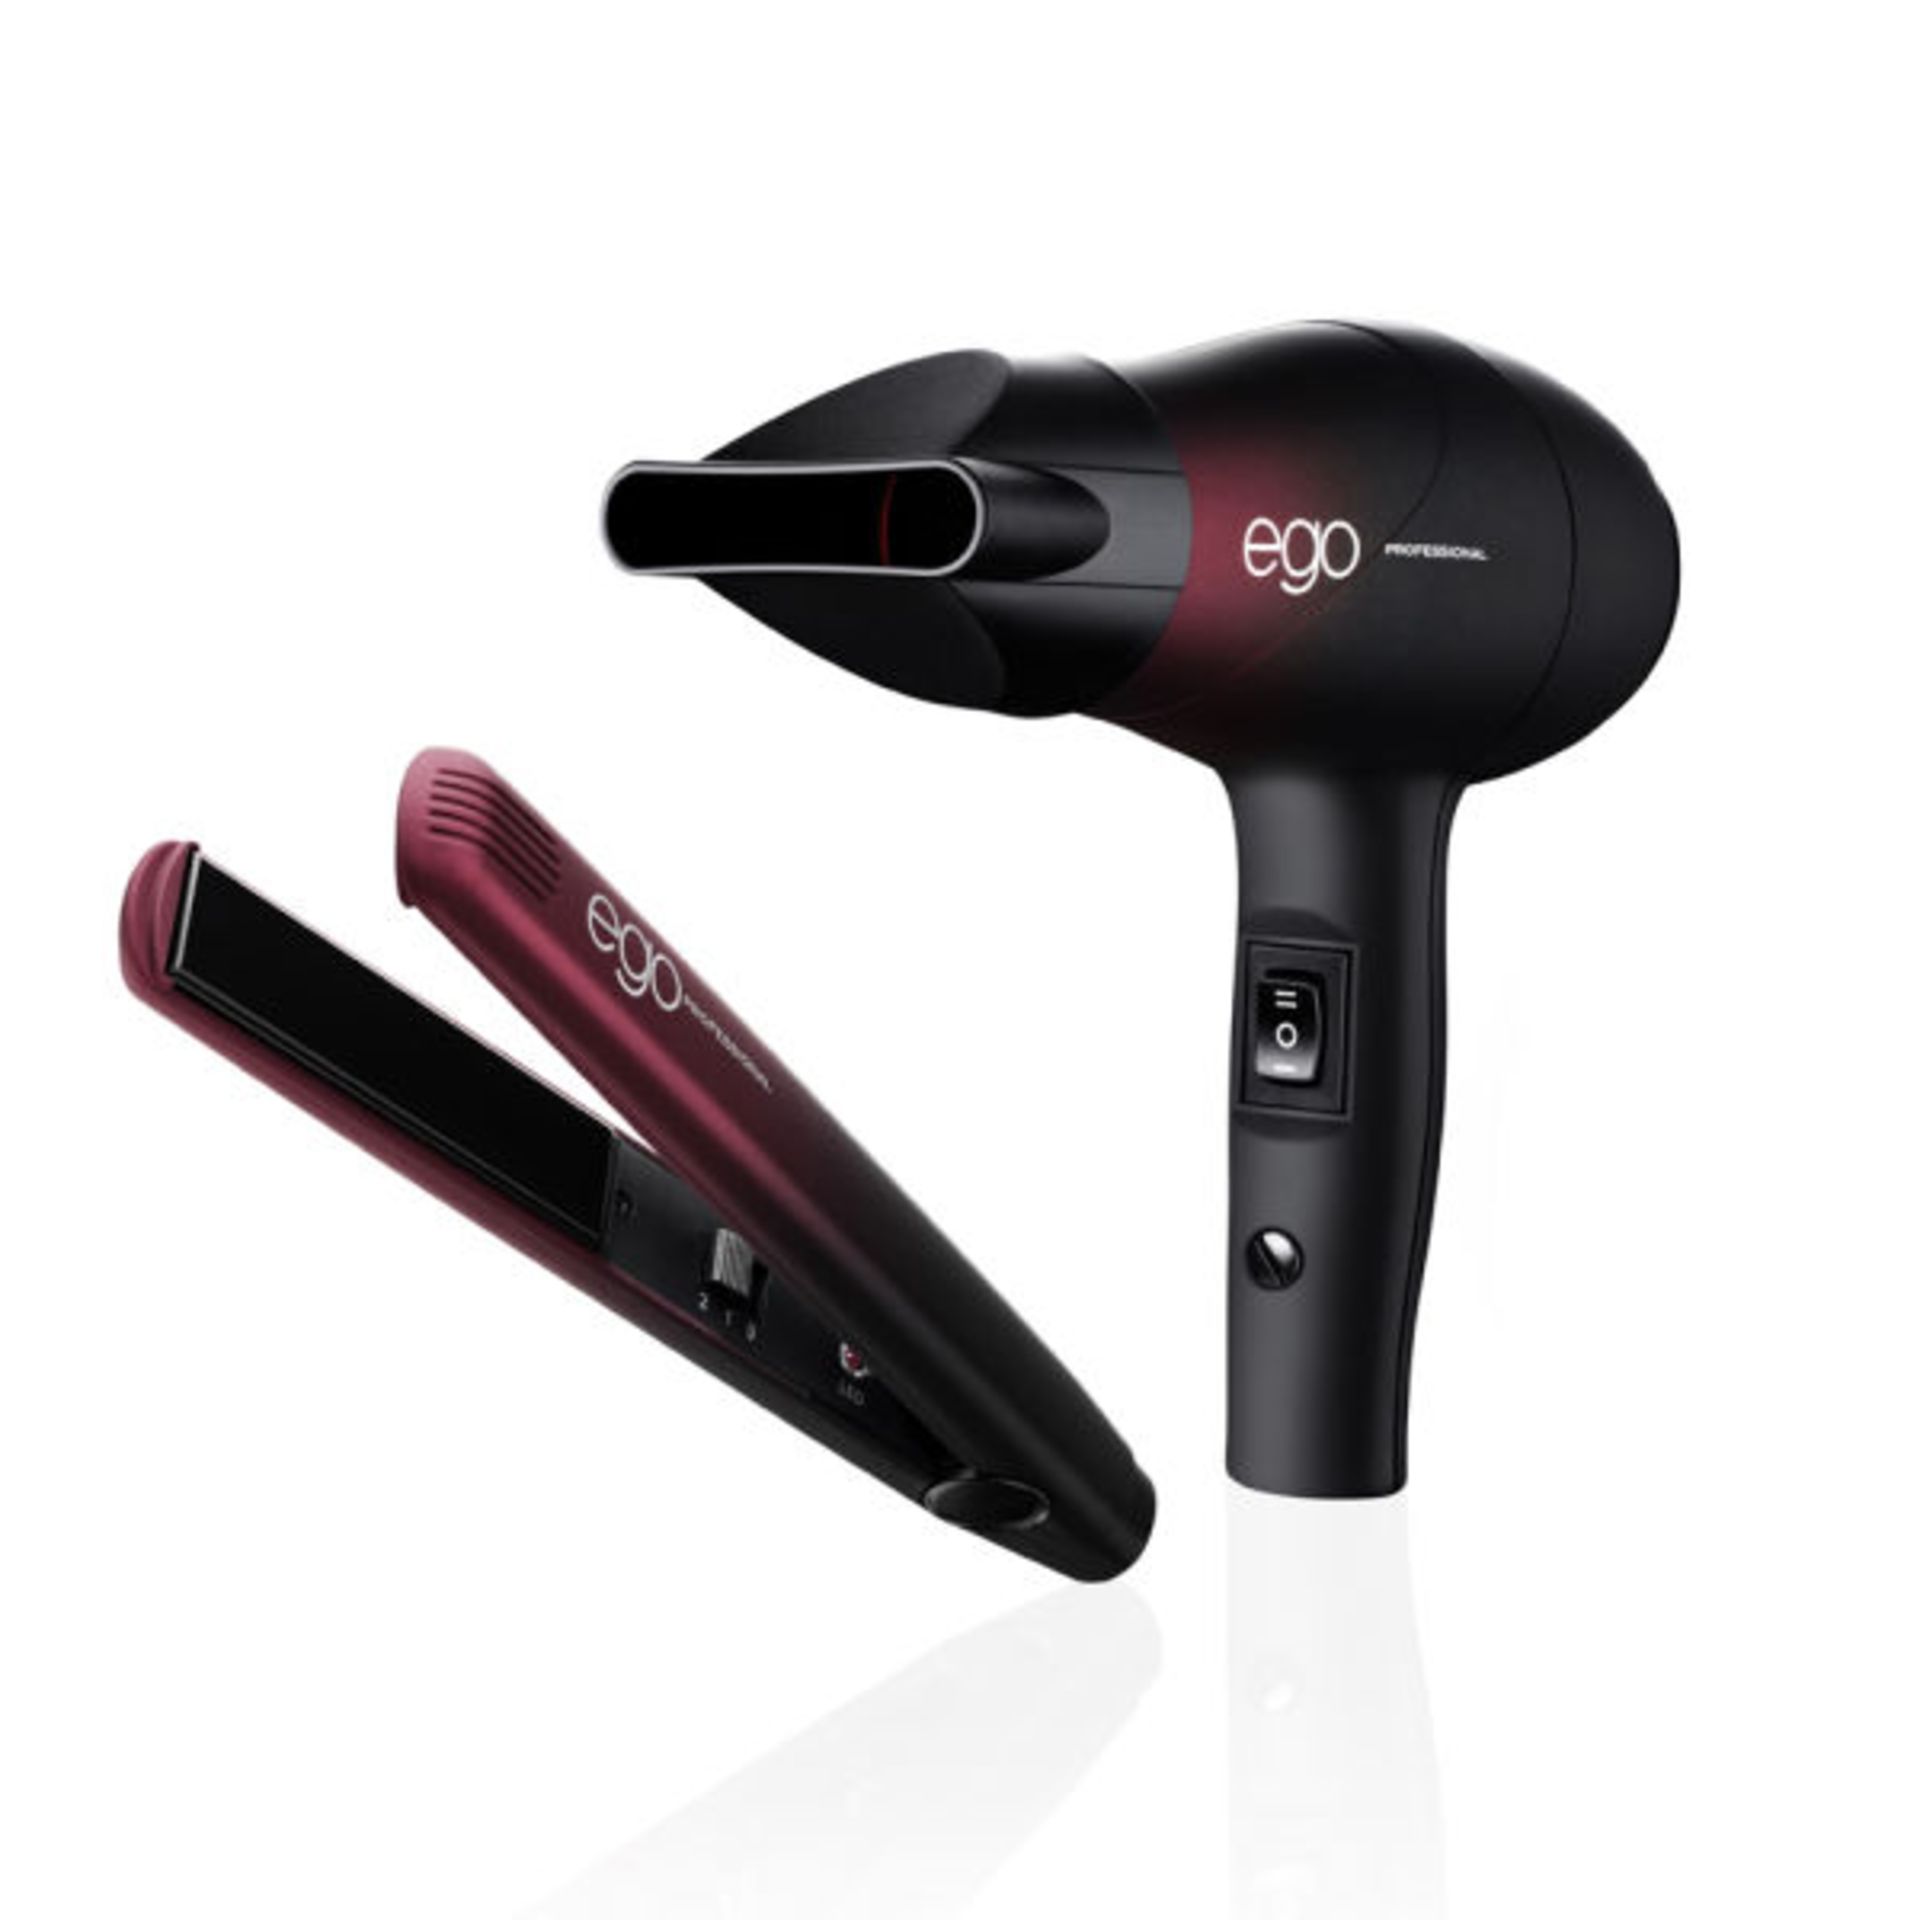 10 x Ego Professional Full On And Fabulous Ego Set (Alter Ego Hairdryer And Little Iron) [Grade B]